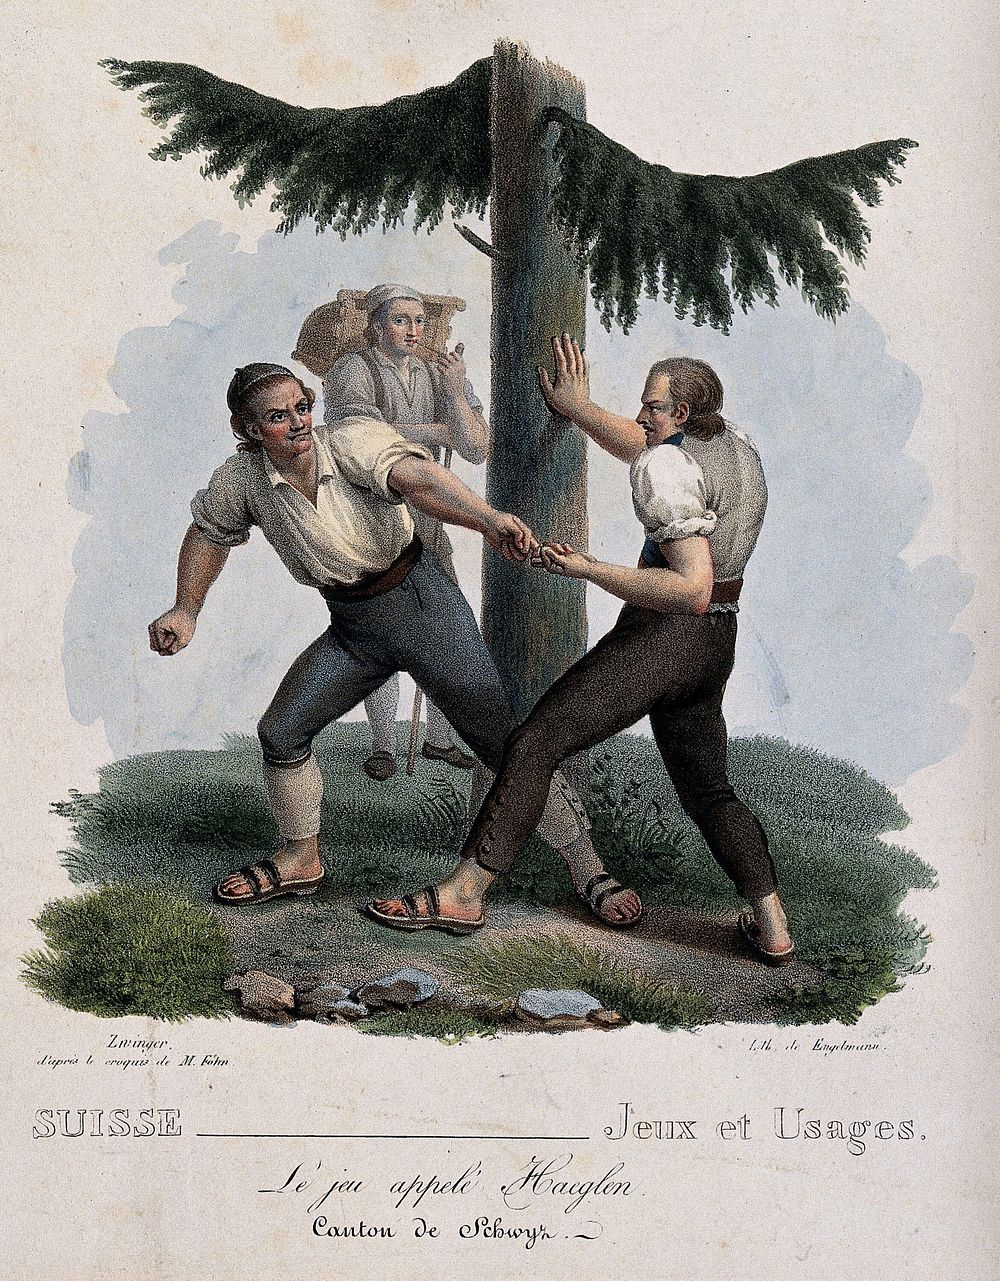 Two men are testing their strength against one another by finger-wrestling. Coloured lithograph by J.B. Zwinger after M.…